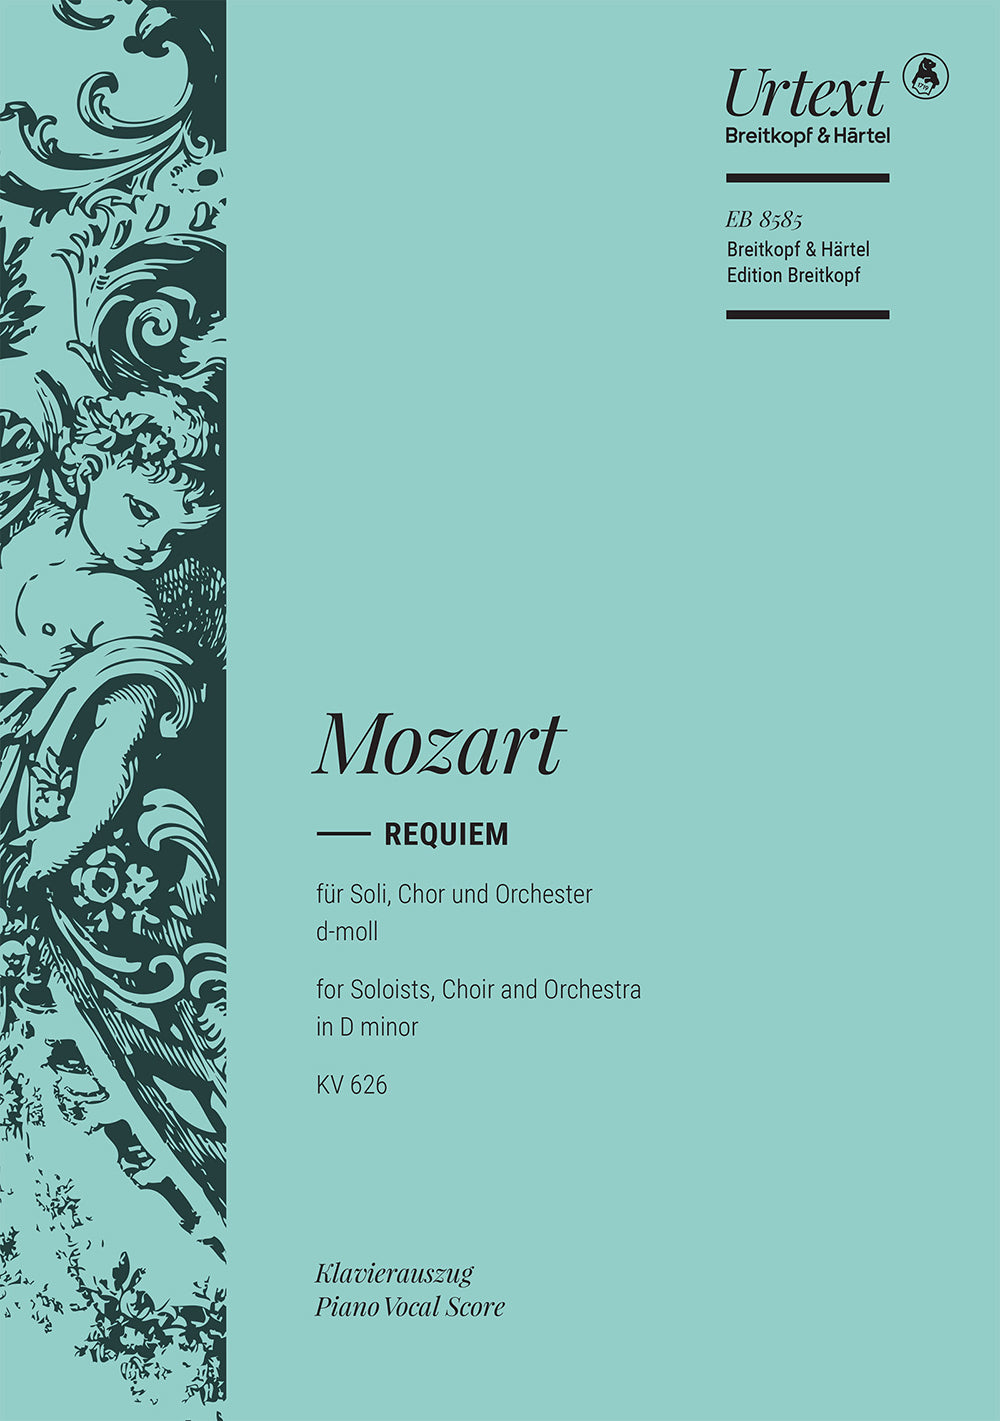 Mozart: Requiem, K. 626 - completed by Landon